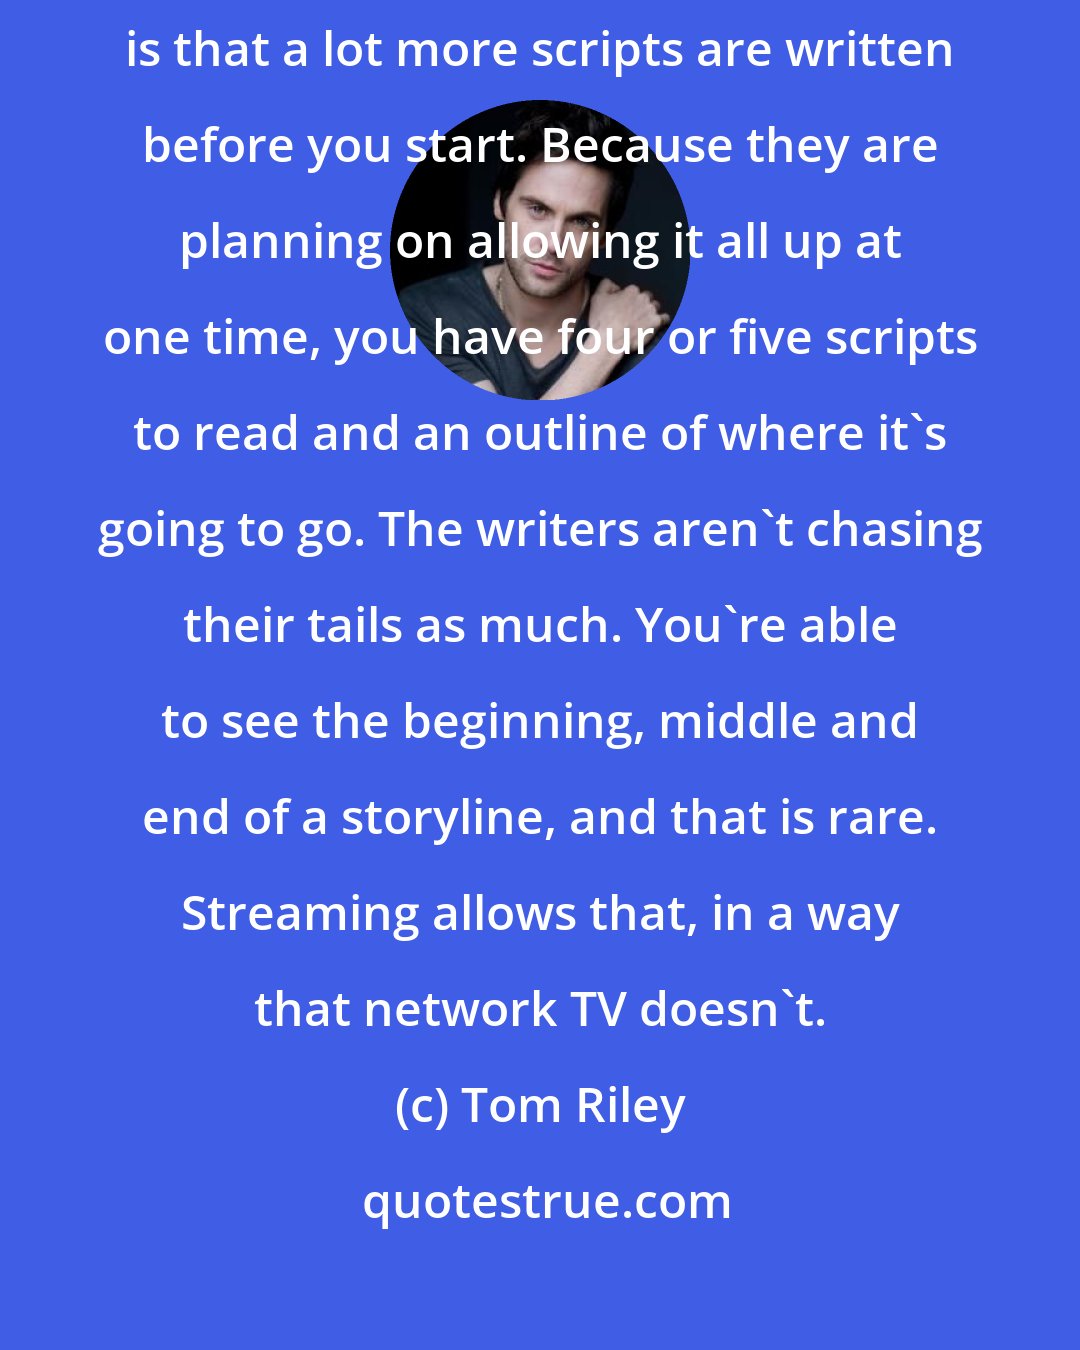 Tom Riley: The other great thing about it, that seems to be the case in streaming, is that a lot more scripts are written before you start. Because they are planning on allowing it all up at one time, you have four or five scripts to read and an outline of where it's going to go. The writers aren't chasing their tails as much. You're able to see the beginning, middle and end of a storyline, and that is rare. Streaming allows that, in a way that network TV doesn't.